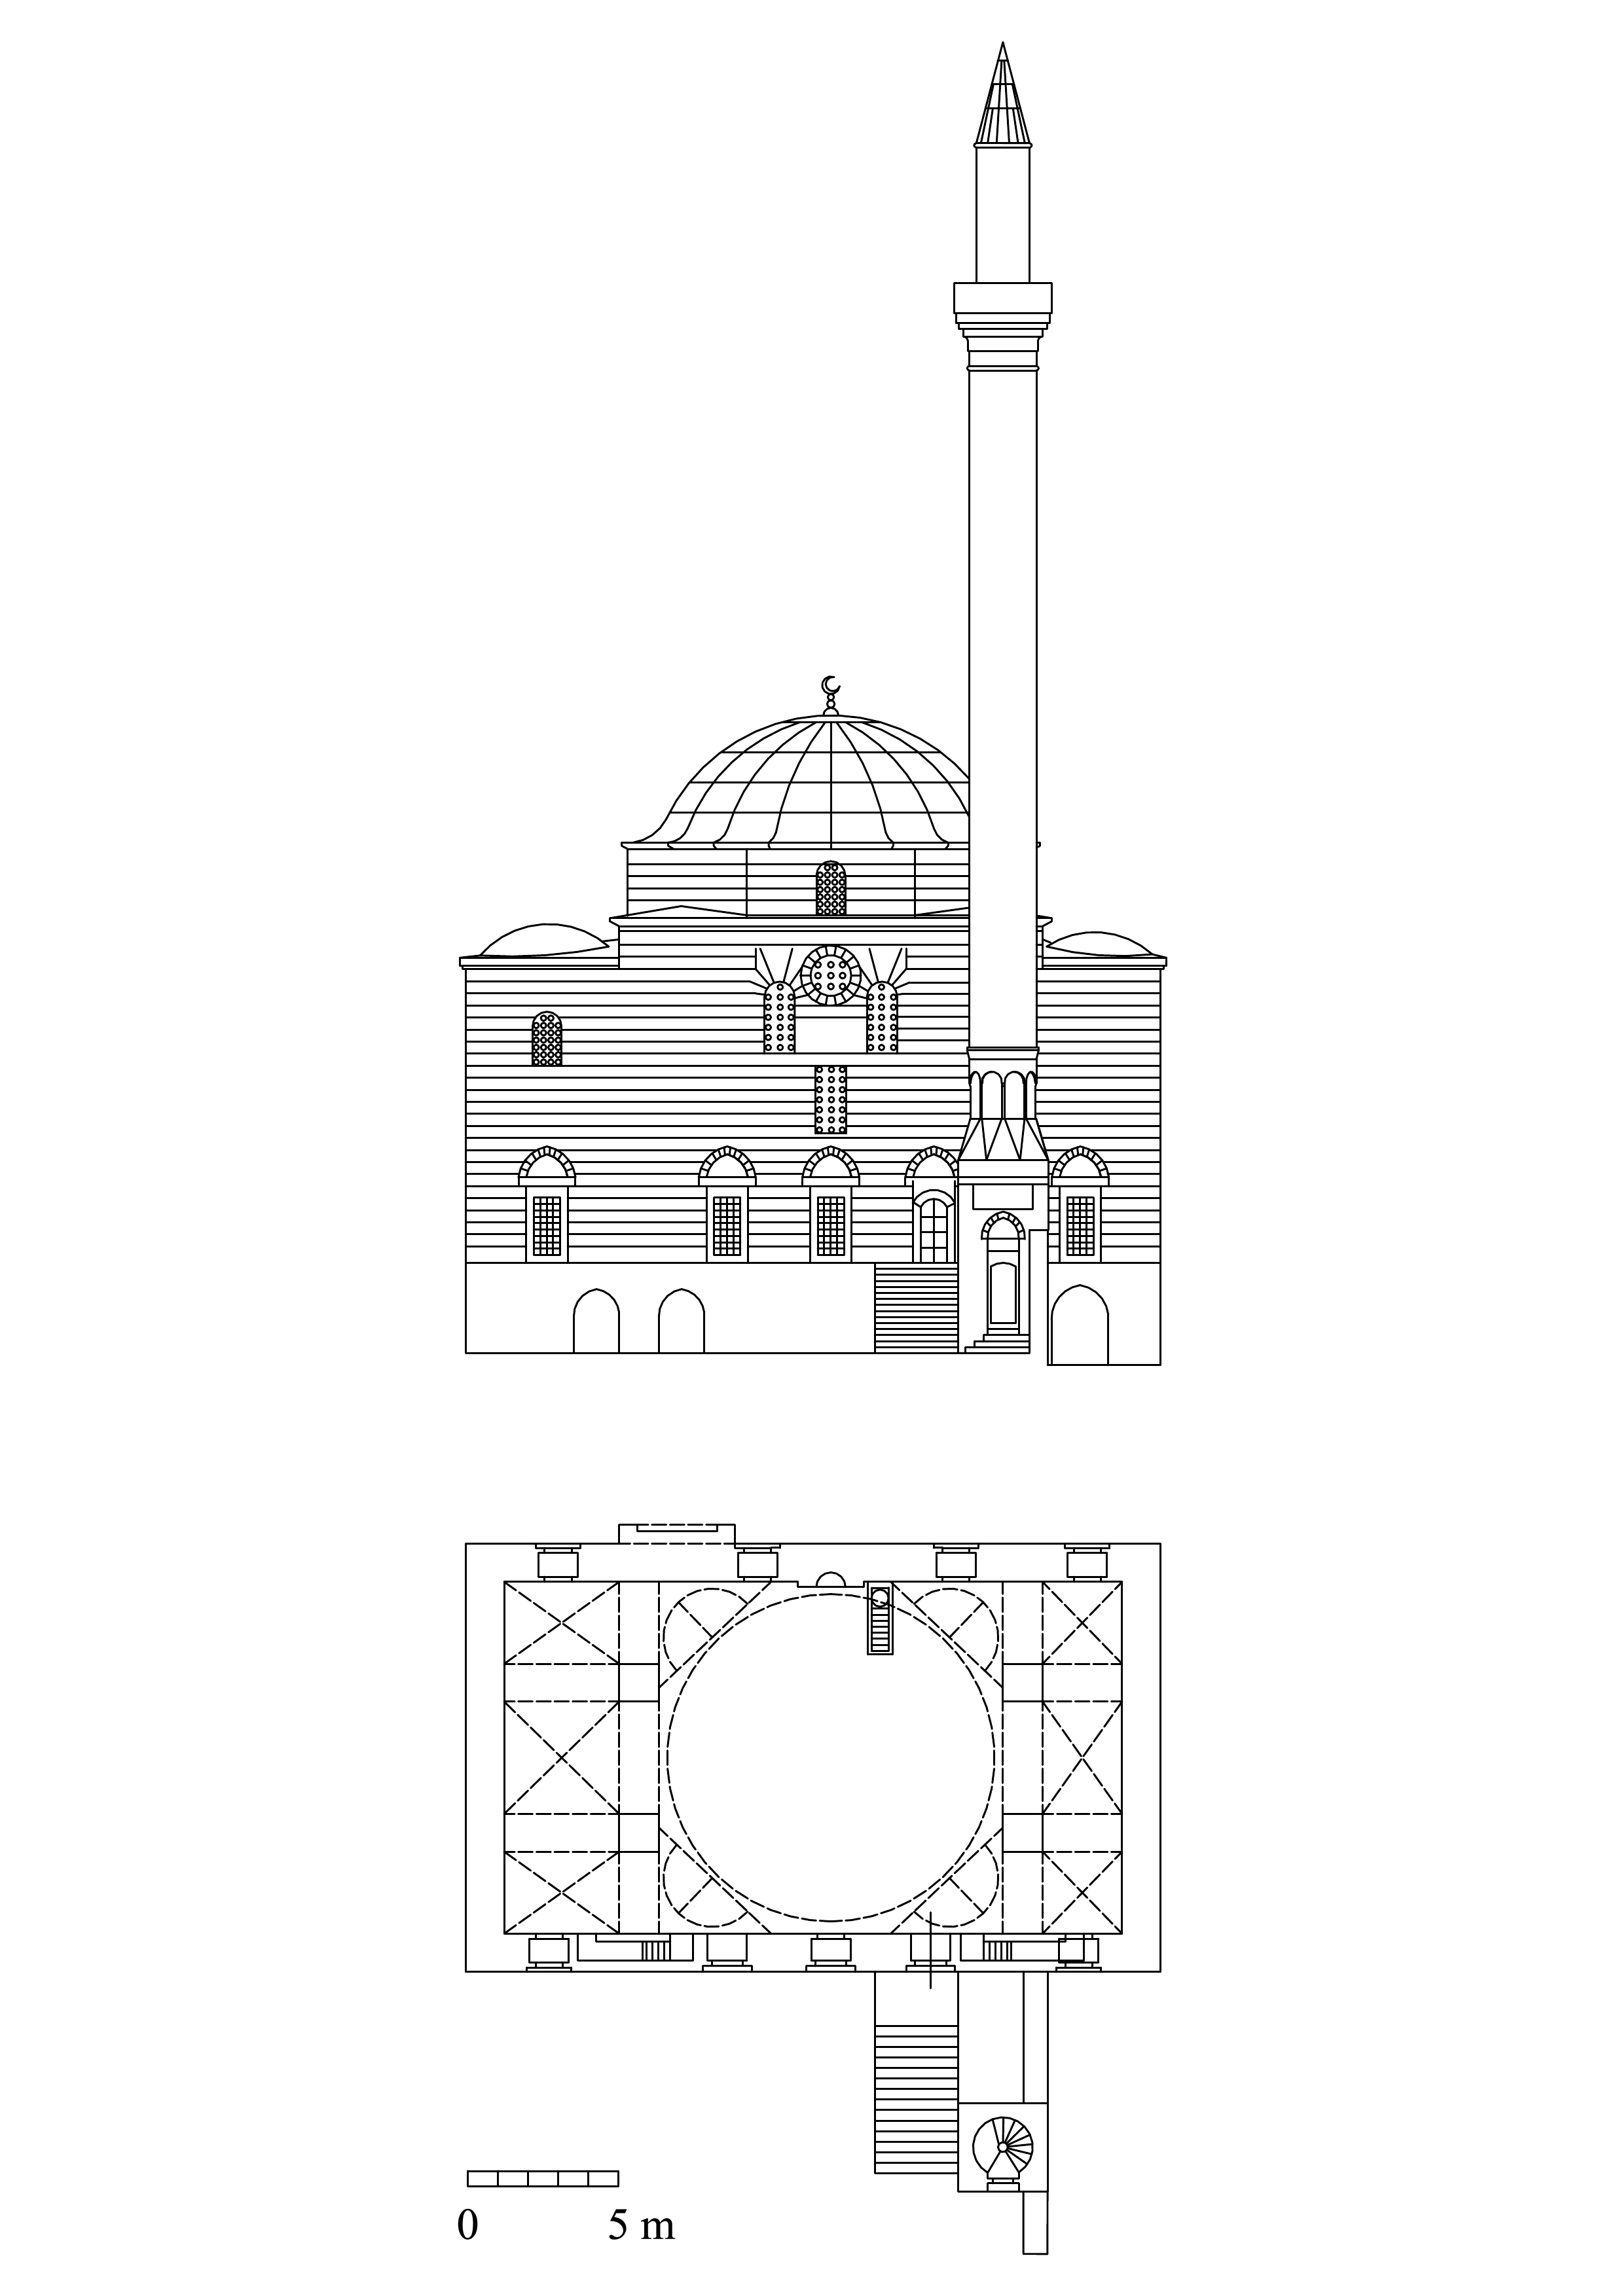 Melek Ahmet Paşa Camii - Floor plan and elevation. DWG file in AutoCAD 2000 format. Click the download button to download a zipped file containing the .dwg file.